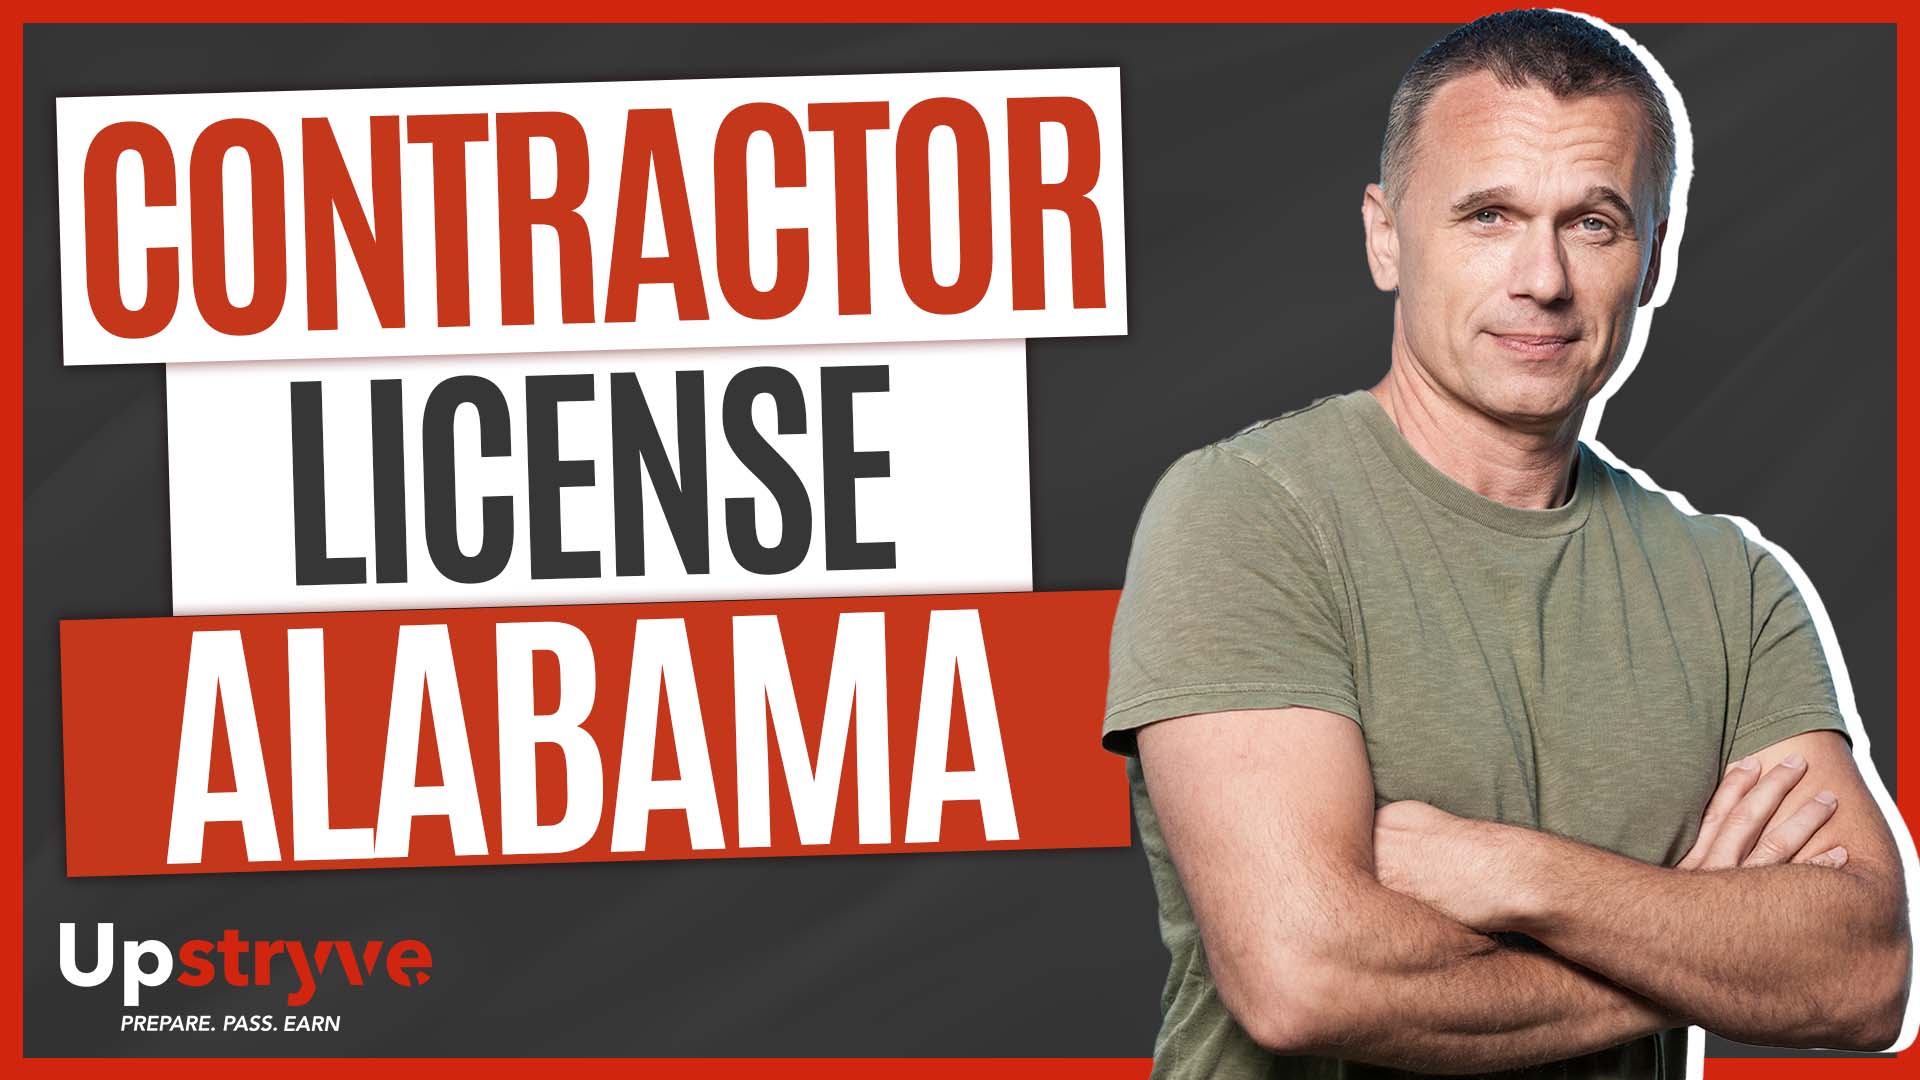 How to become a contractor in the state of Alabama. Becoming a GeneralContractor in Alabama. How to become a Contractor in Alabama, General Contractor Alabama. Alabama General Contractor. How to become a General Contractor in Alabama.

Upstryve is the only tutoring platform dedicated to providing aspiring trades professionals an affordable all-encompassing learning experience. We provide 1-on-1 personalized online exam and licensing prep for trades professionals to confidently pass their state or national exams and get their license.